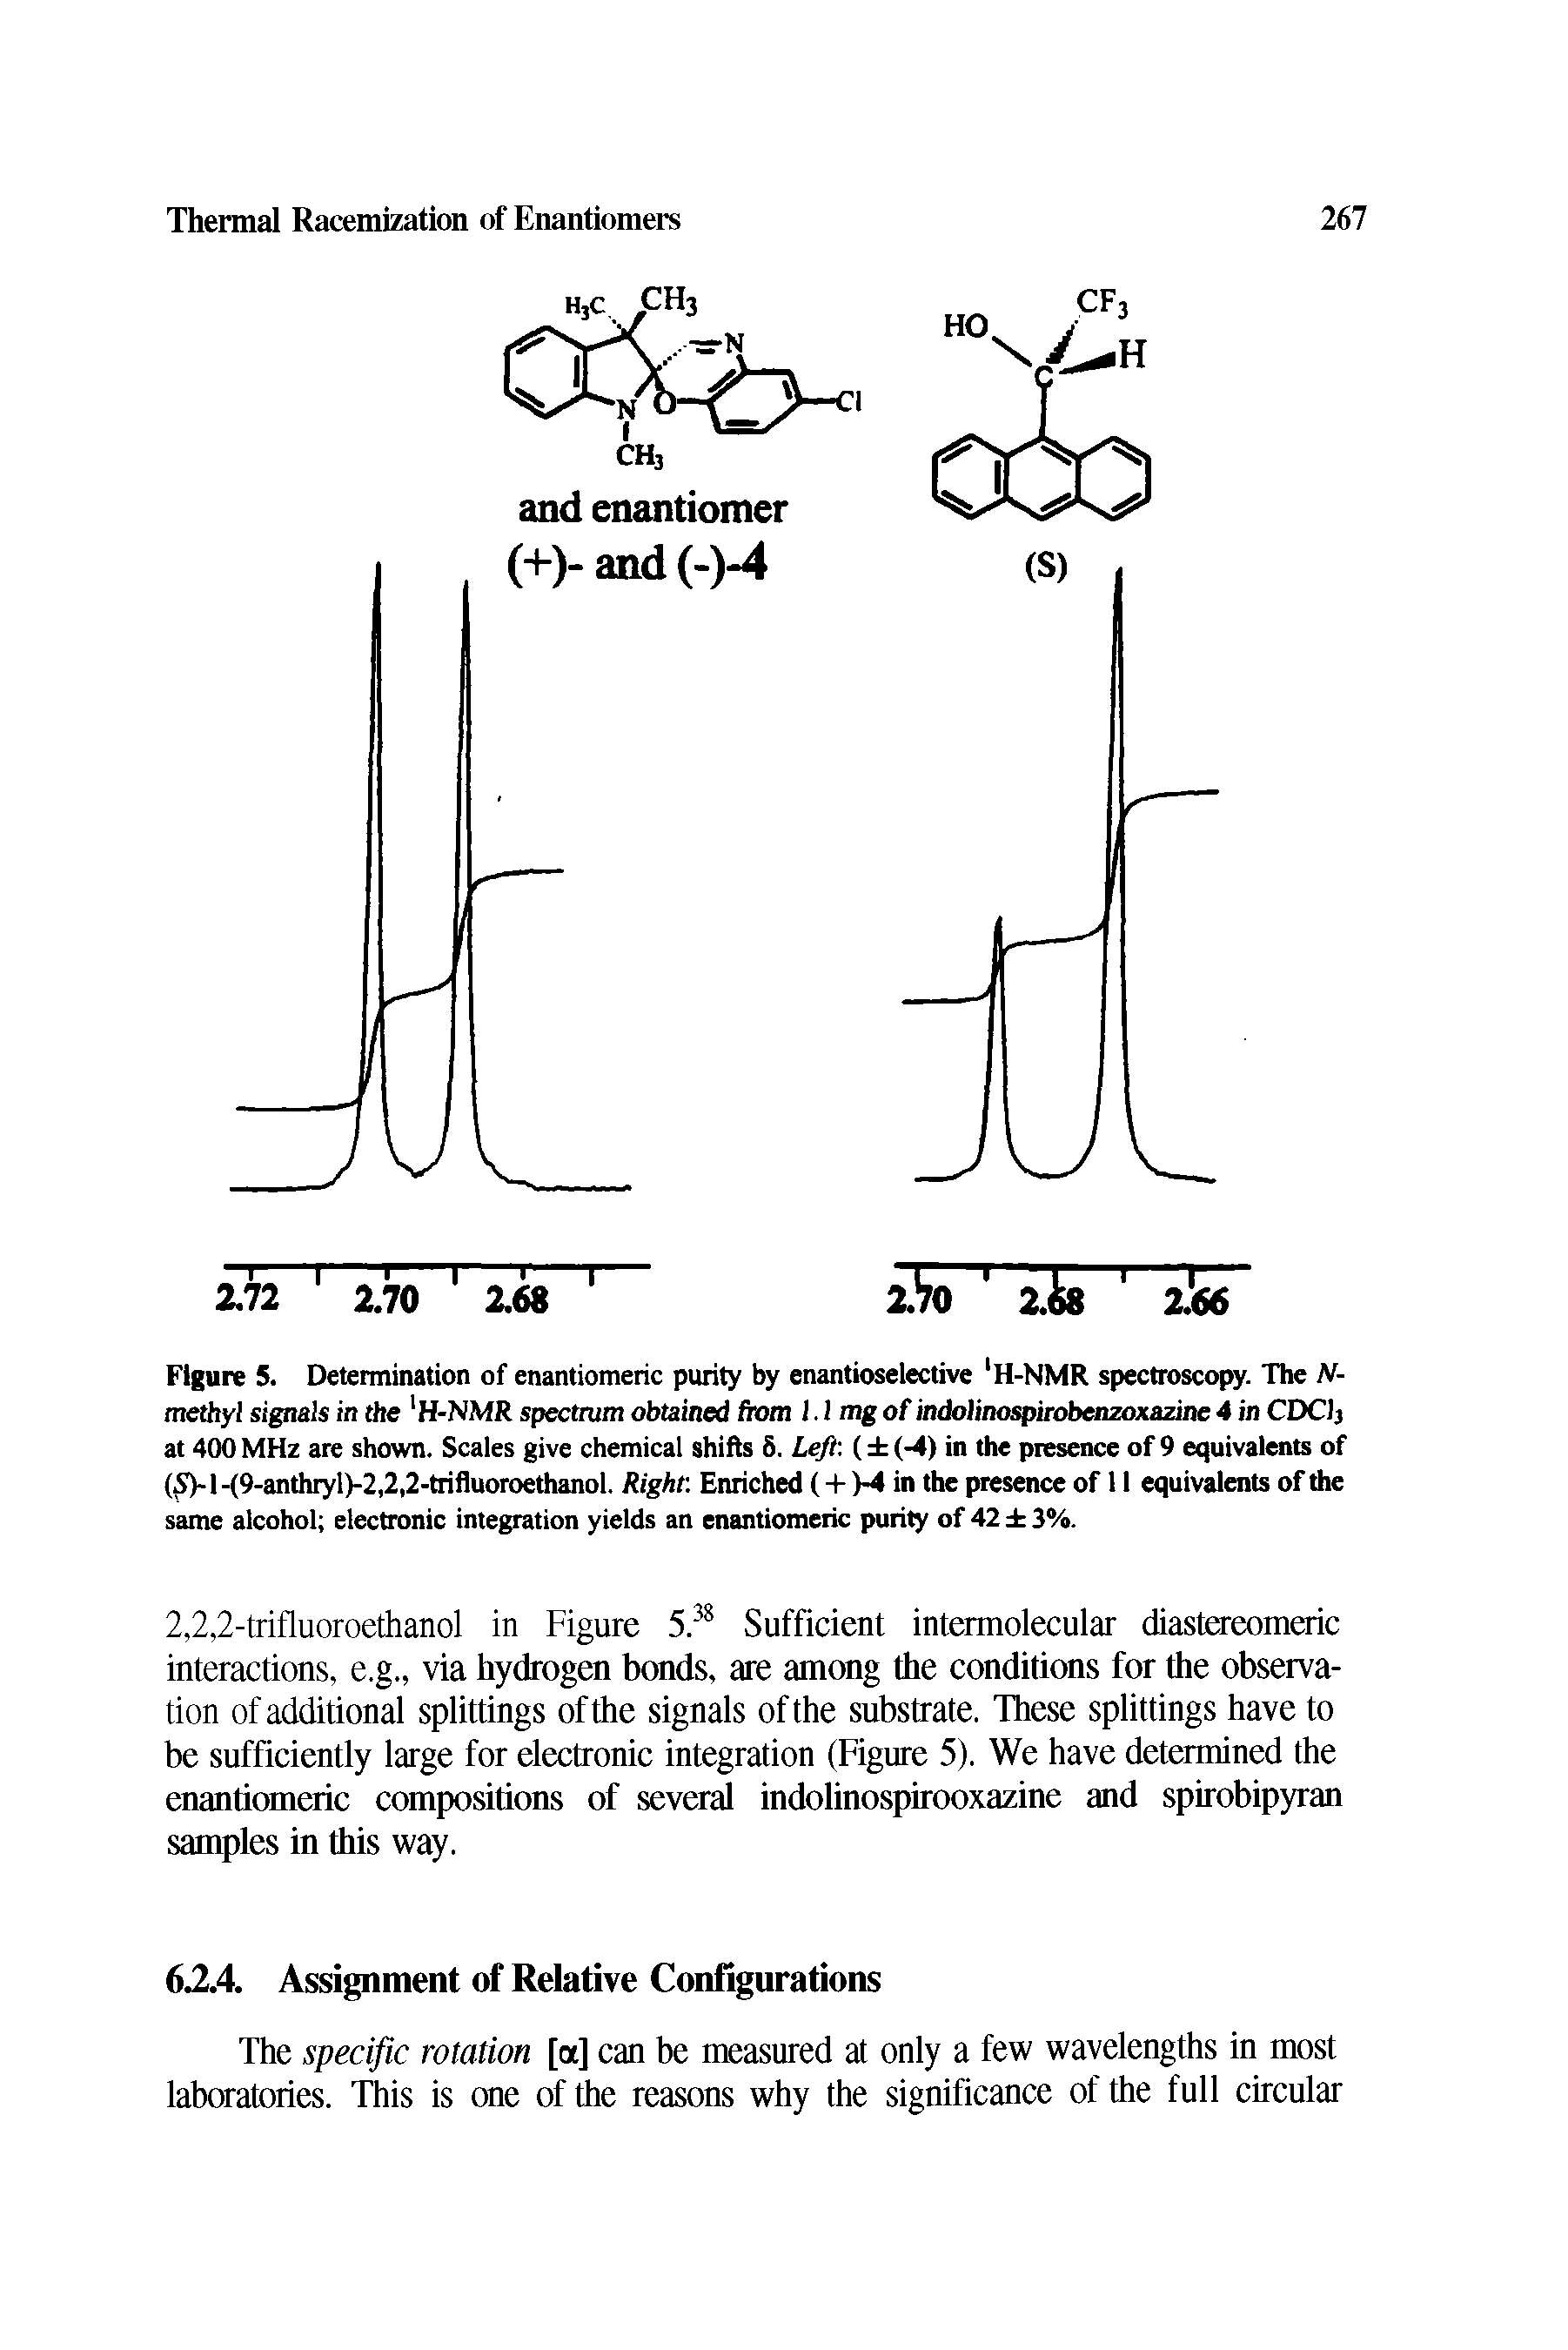 Figure 5. Determination of enantiomeric purity by enantioselective H-NMR spectroscopy. The N-methyl signals in the H-NMR spectrum obtained from 1.1 mg of indolinospirobenzoxazine 4 in CDClj at 400 MHz are shown. Scales give chemical shifts 5. Left ( (-4) in the presence of 9 equivalents of (Sy 1 -(9-anthryl)-2,2,2-trifluoroethanol. Right Enriched (+ >4 in the presence of 11 equivalents of the same alcohol electronic integration yields an enantiomeric purity of 42 3%.